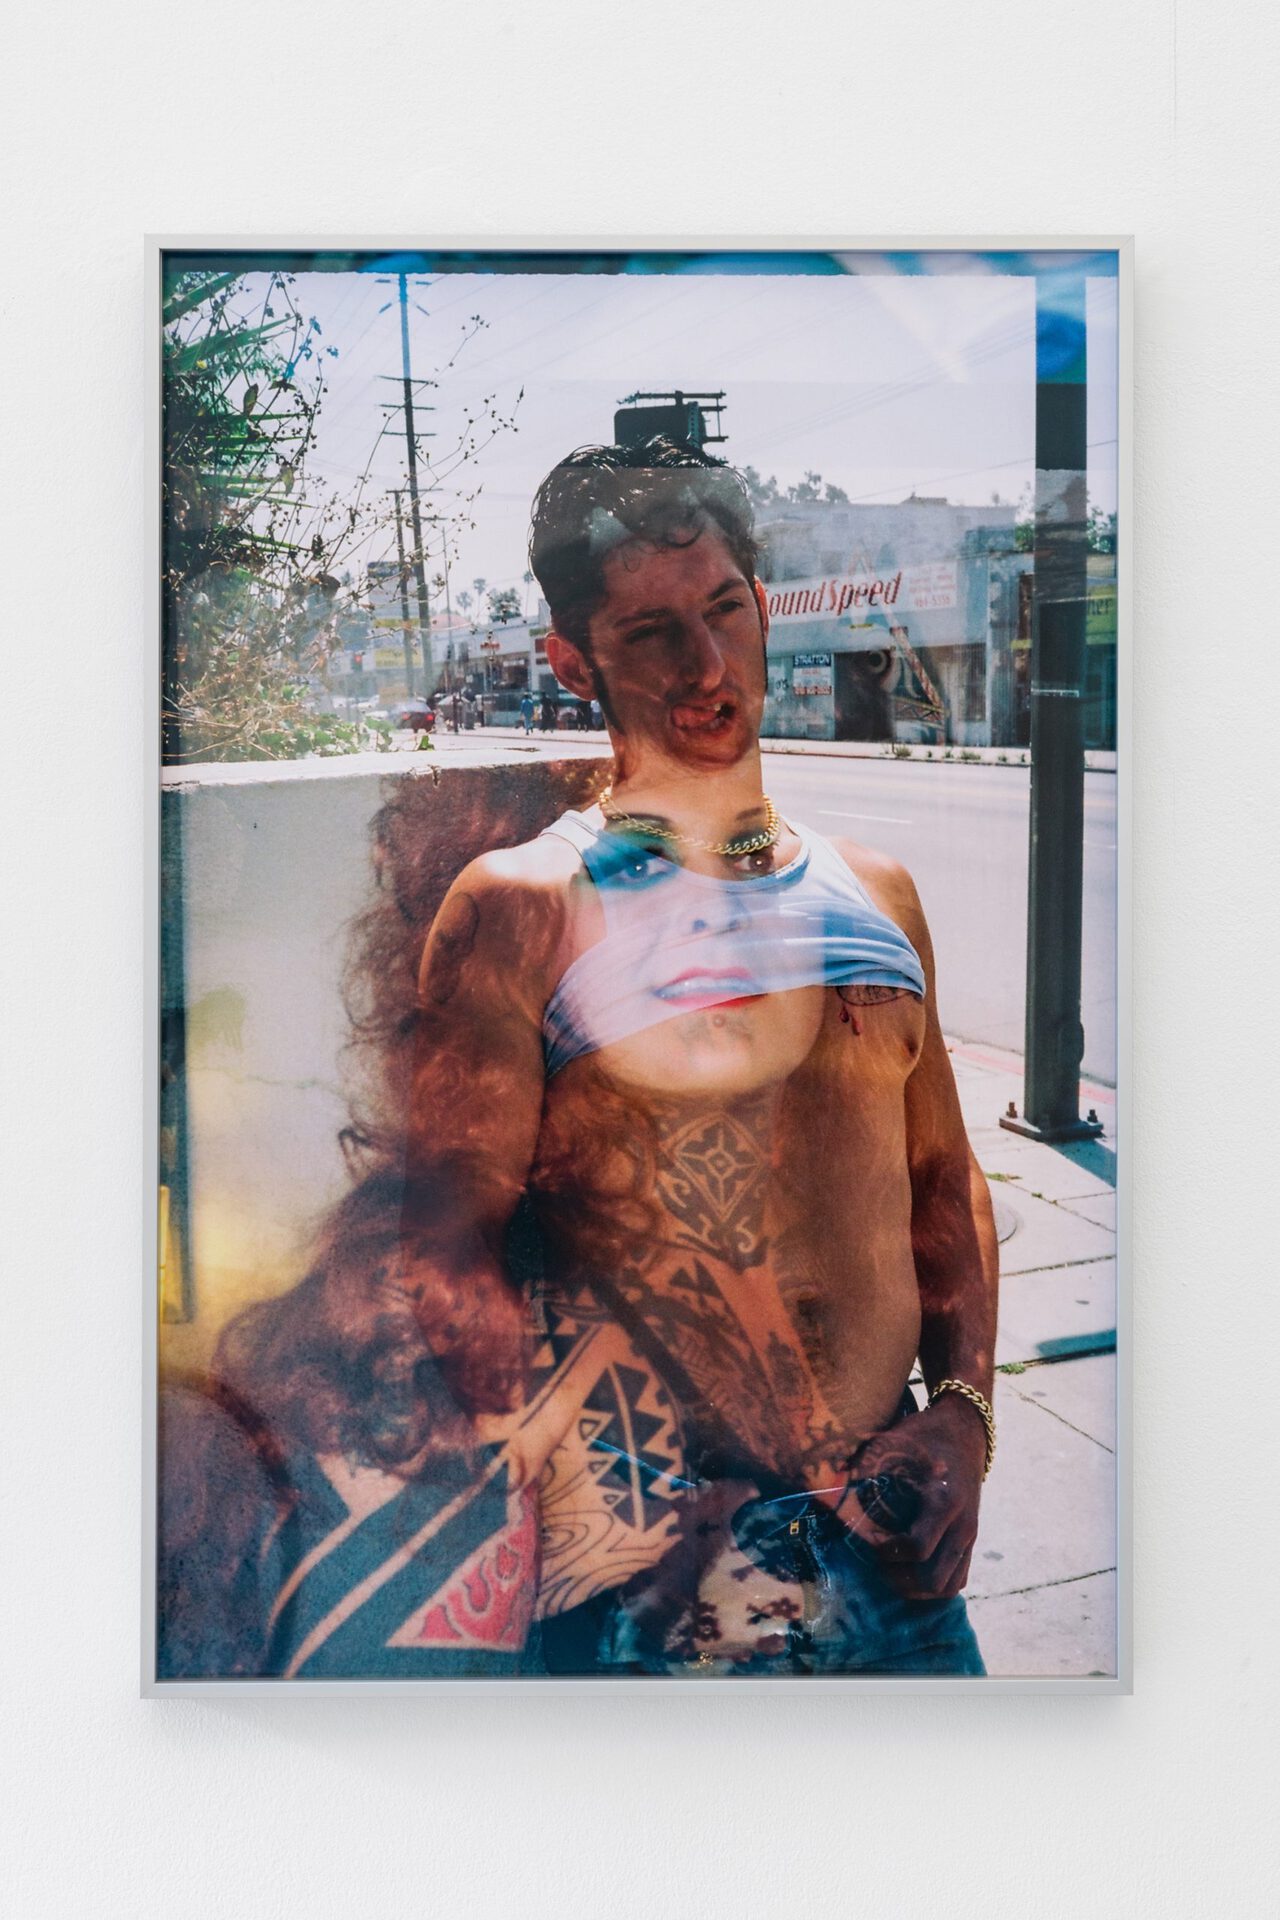 Bruce LaBruce, Hustler, 1995-2021, White Accidental Double Exposure of Tony Ward and Ron Athey, C-Print, 76 x 51cm